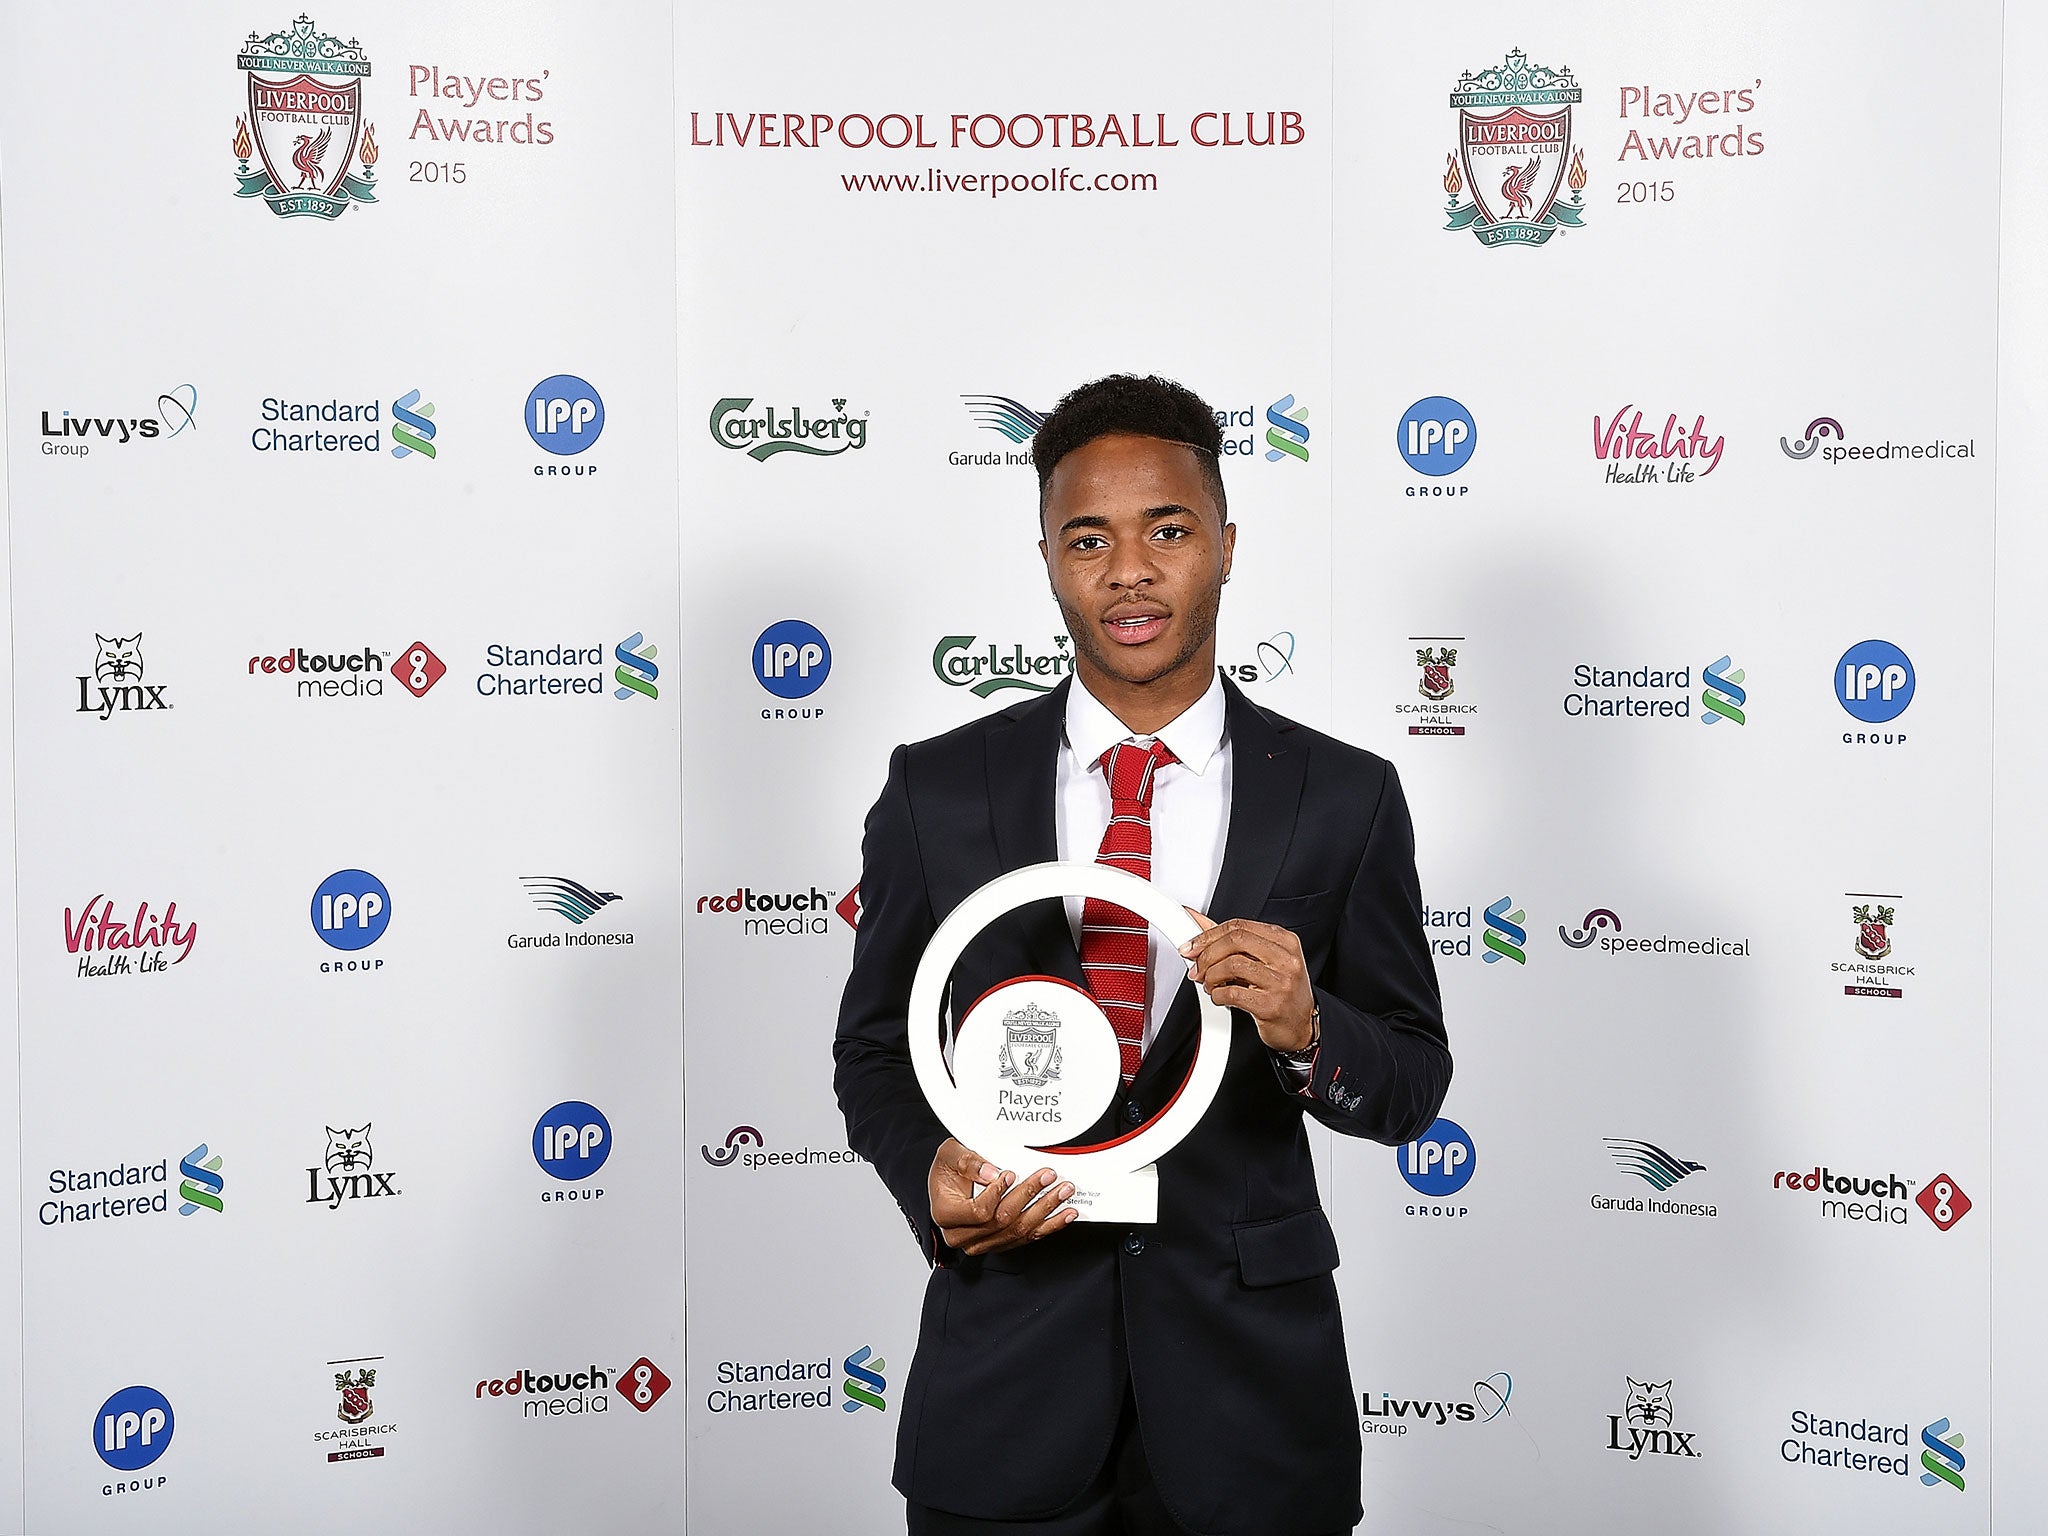 Raheem Sterling pictured with his Liverpool Young Player of the Year award